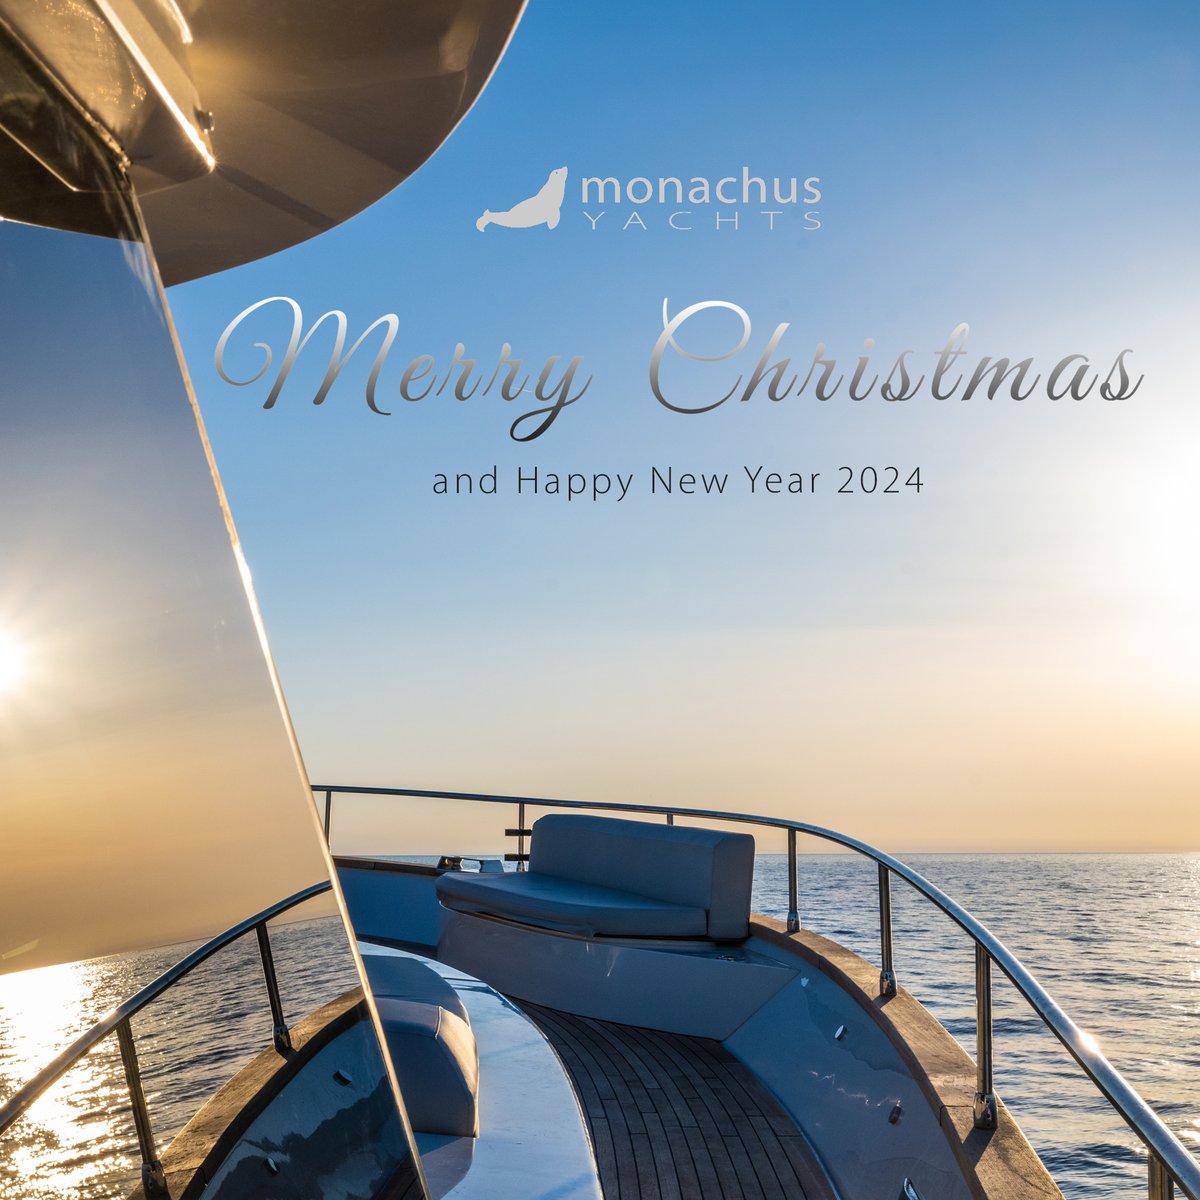 We wish you good winds in the coming year and that all your wishes come true. Enjoy the Holidays 🥰!!! -- monachusyachts.com